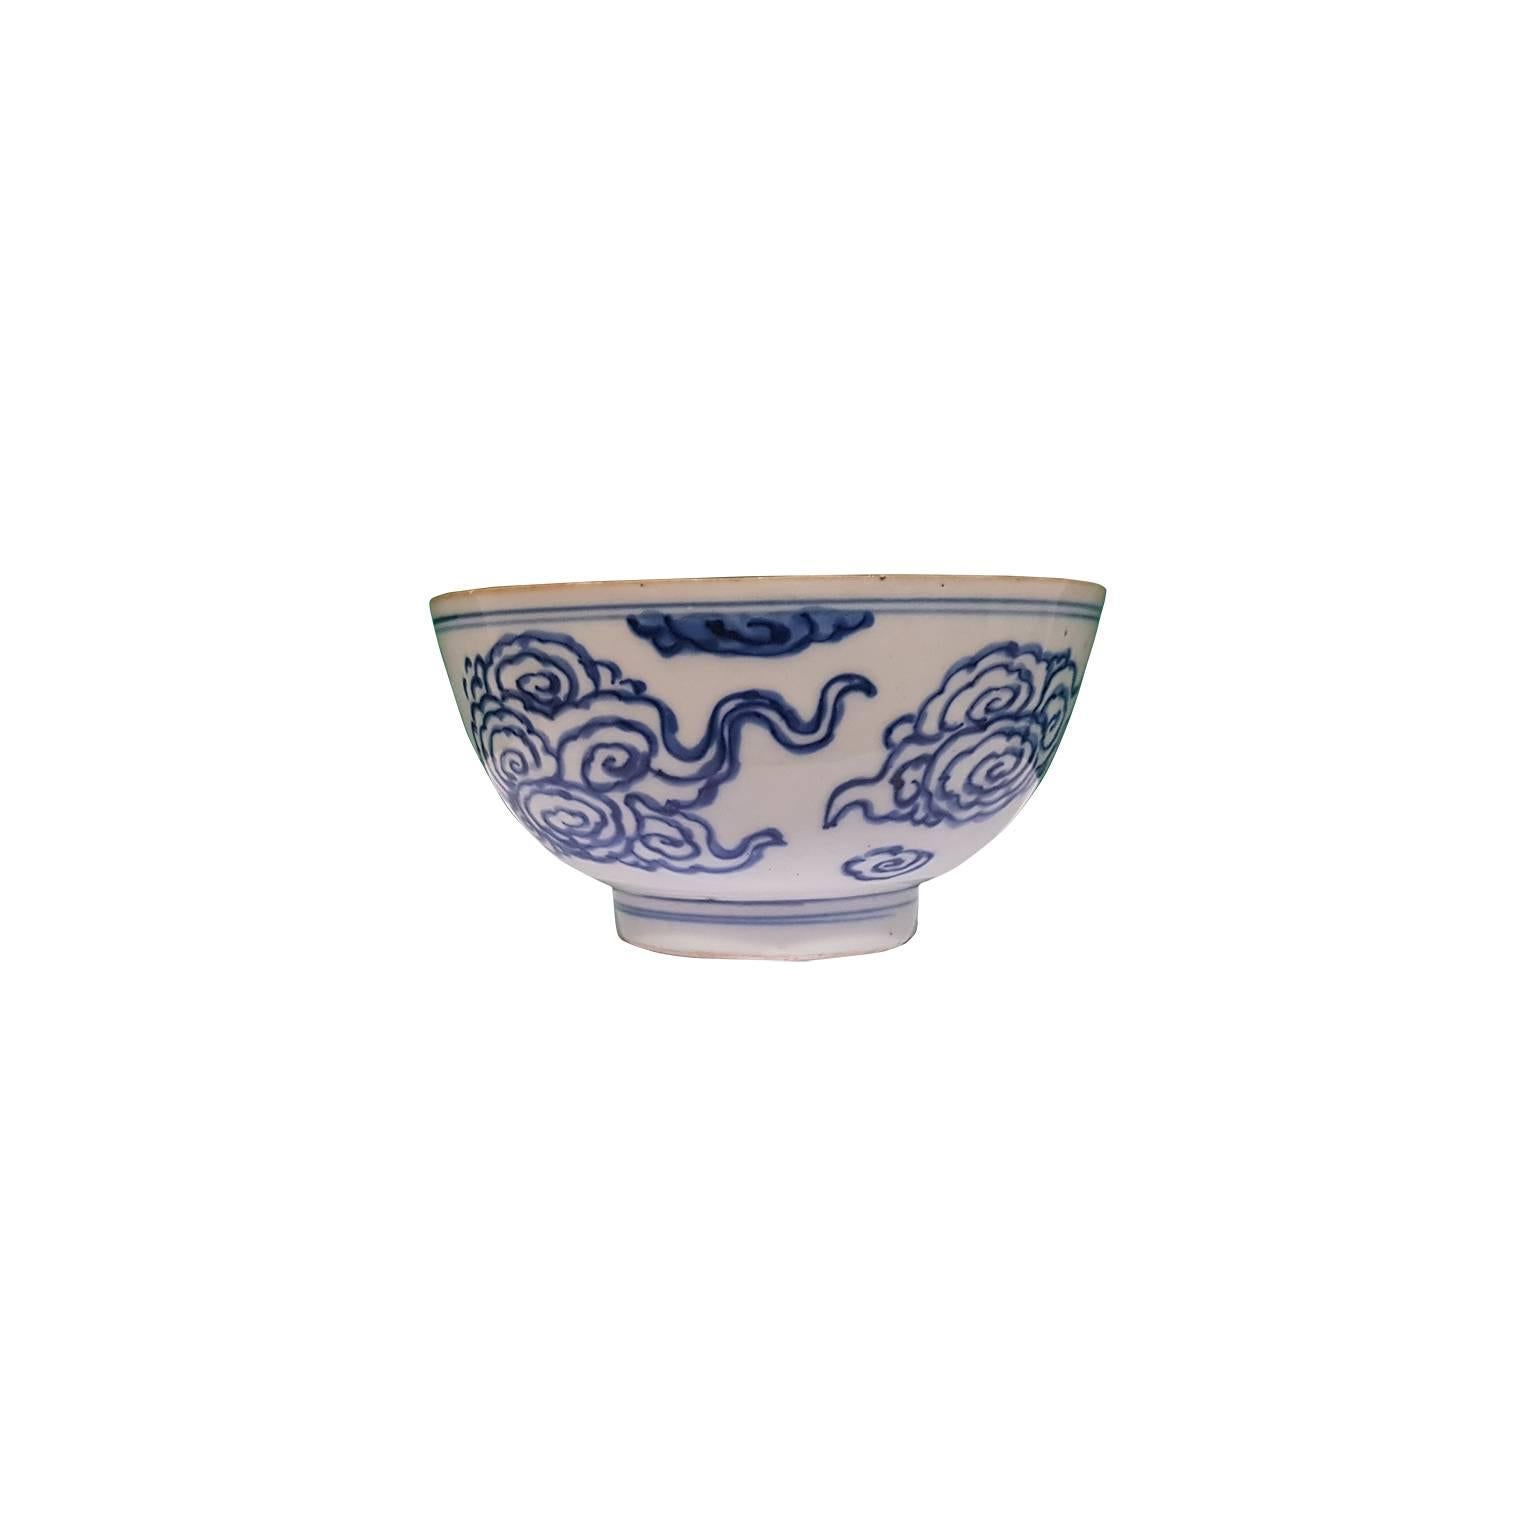 Enameled Chinese Blue and White Bowl, 16th-17th Century